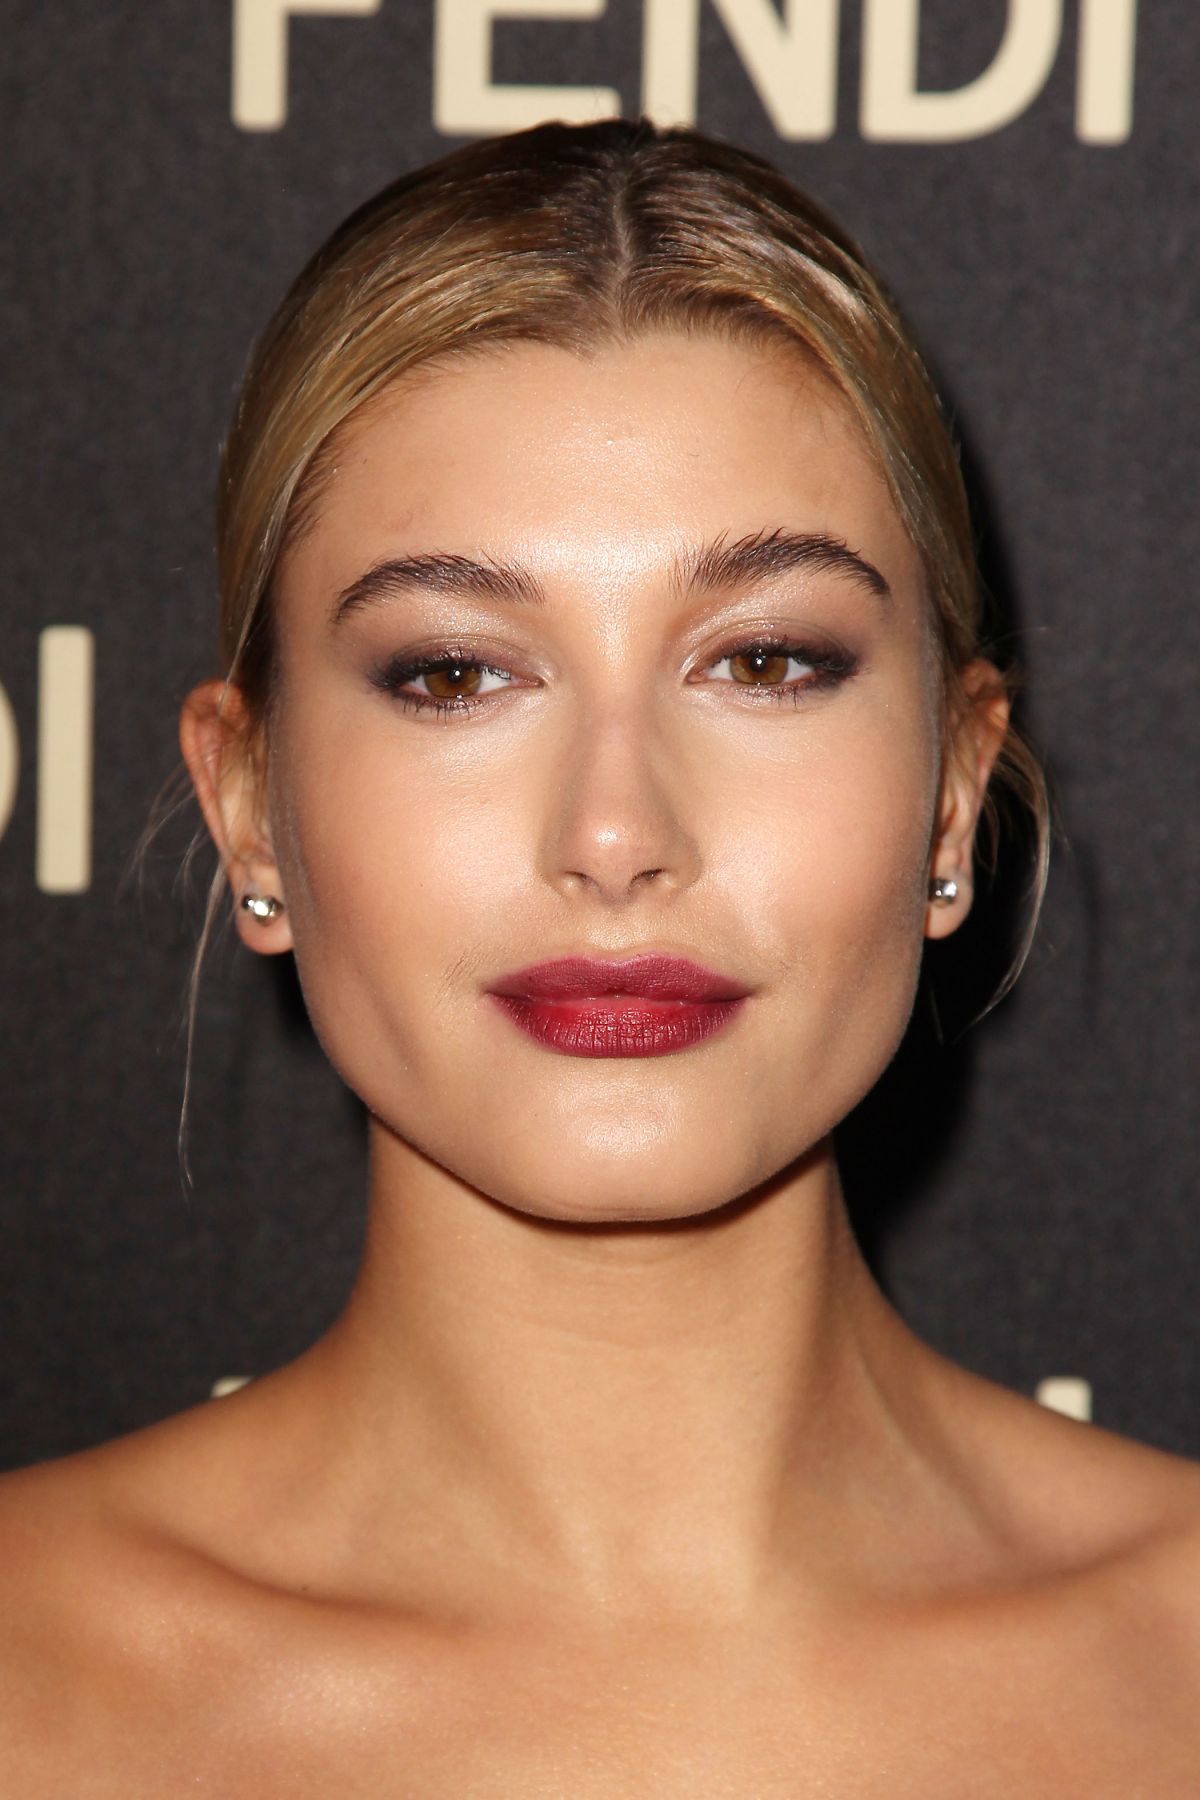 hailey-baldwin-at-fendi-new-york-flagship-boutique-party-at-mbfw-in-new-york_27.jpg